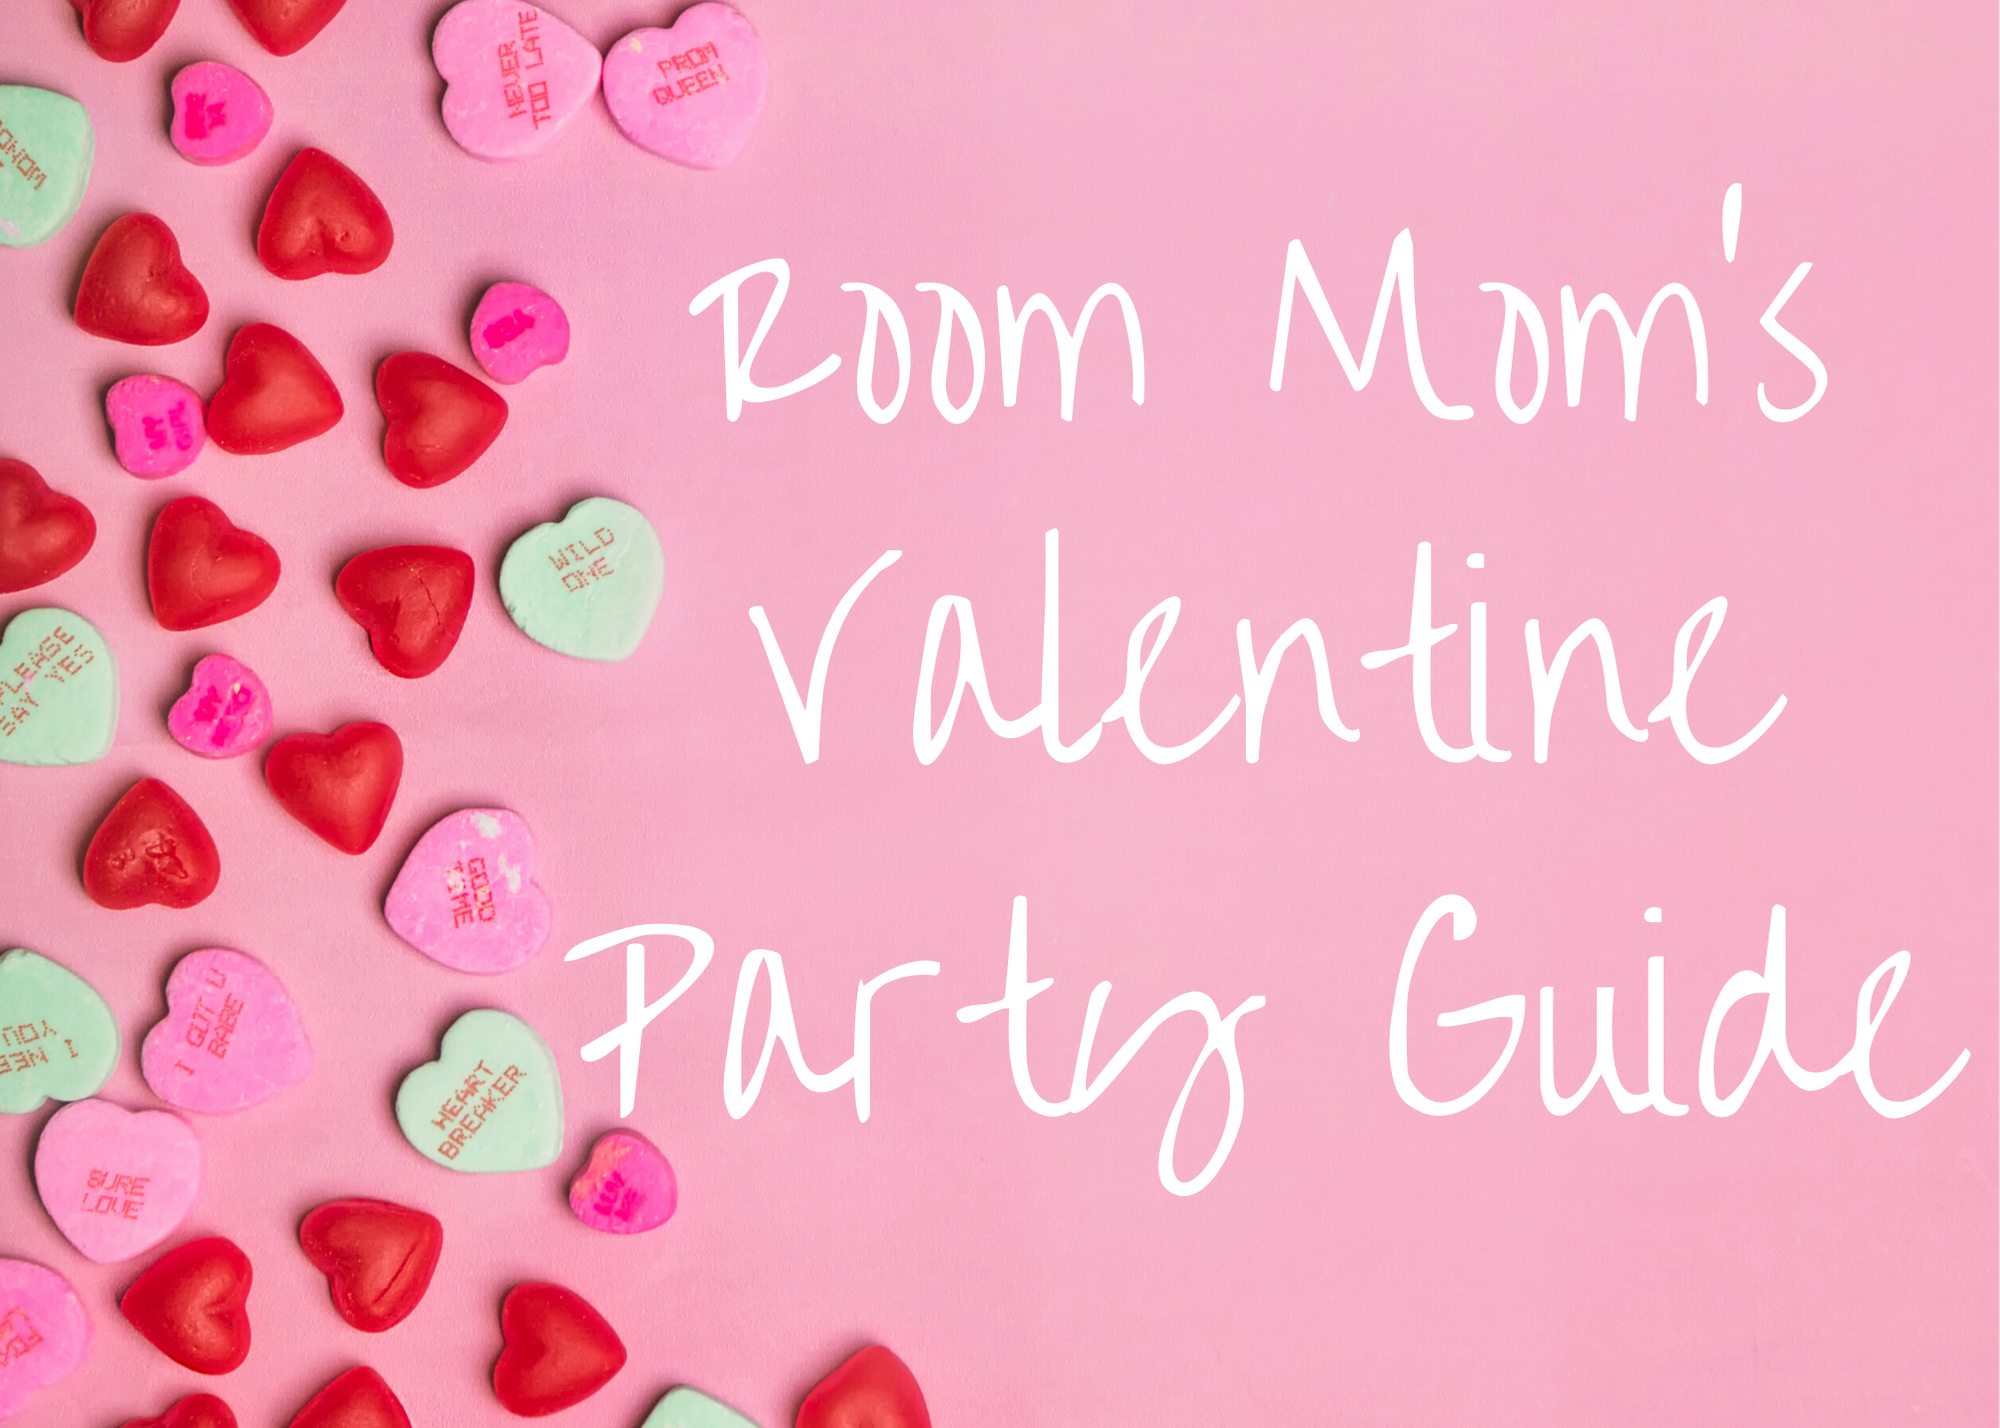 pink background with candy hearts, and the words, "Room Mom's Valentine Party Guide"